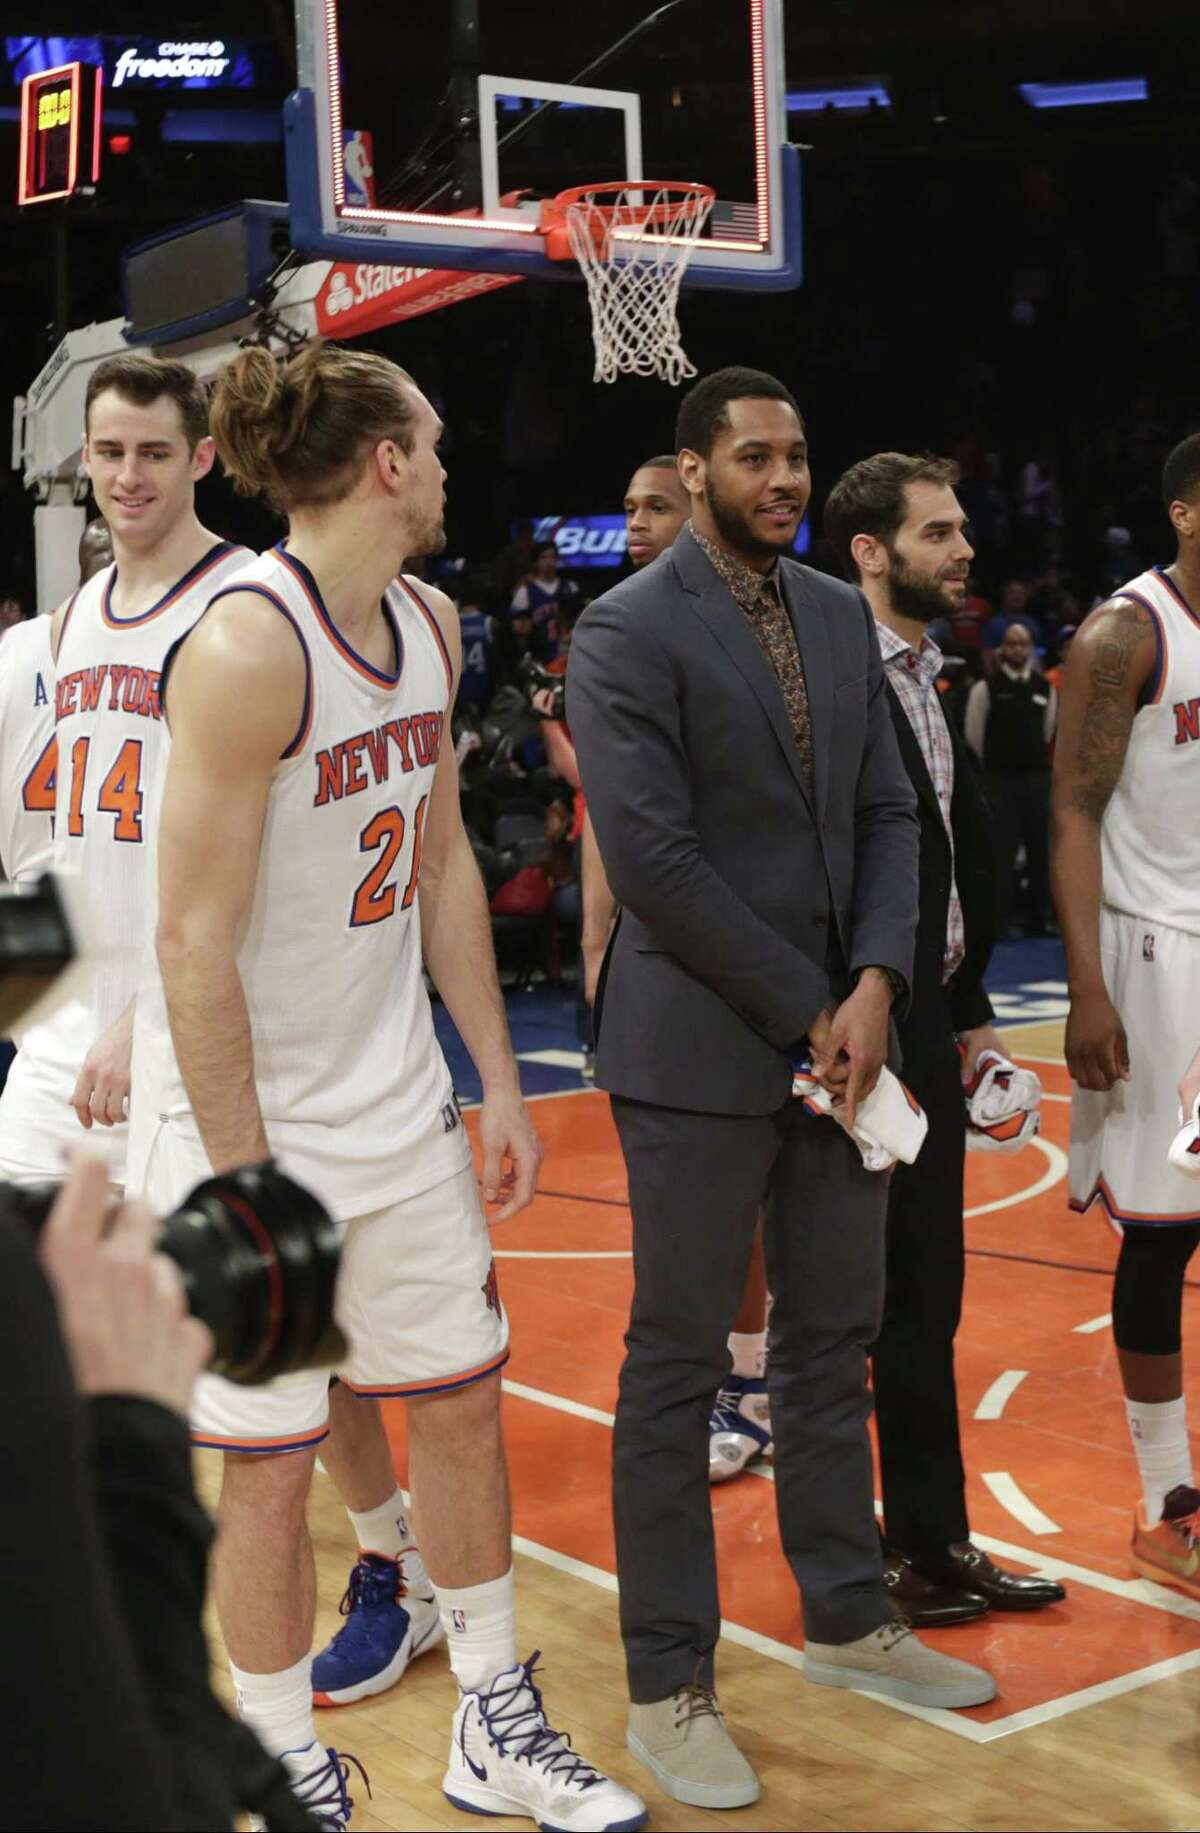 Knicks star Carmelo Anthony stands on the court with his teammates after a game against the Detroit Pistons on Wednesday in New York.